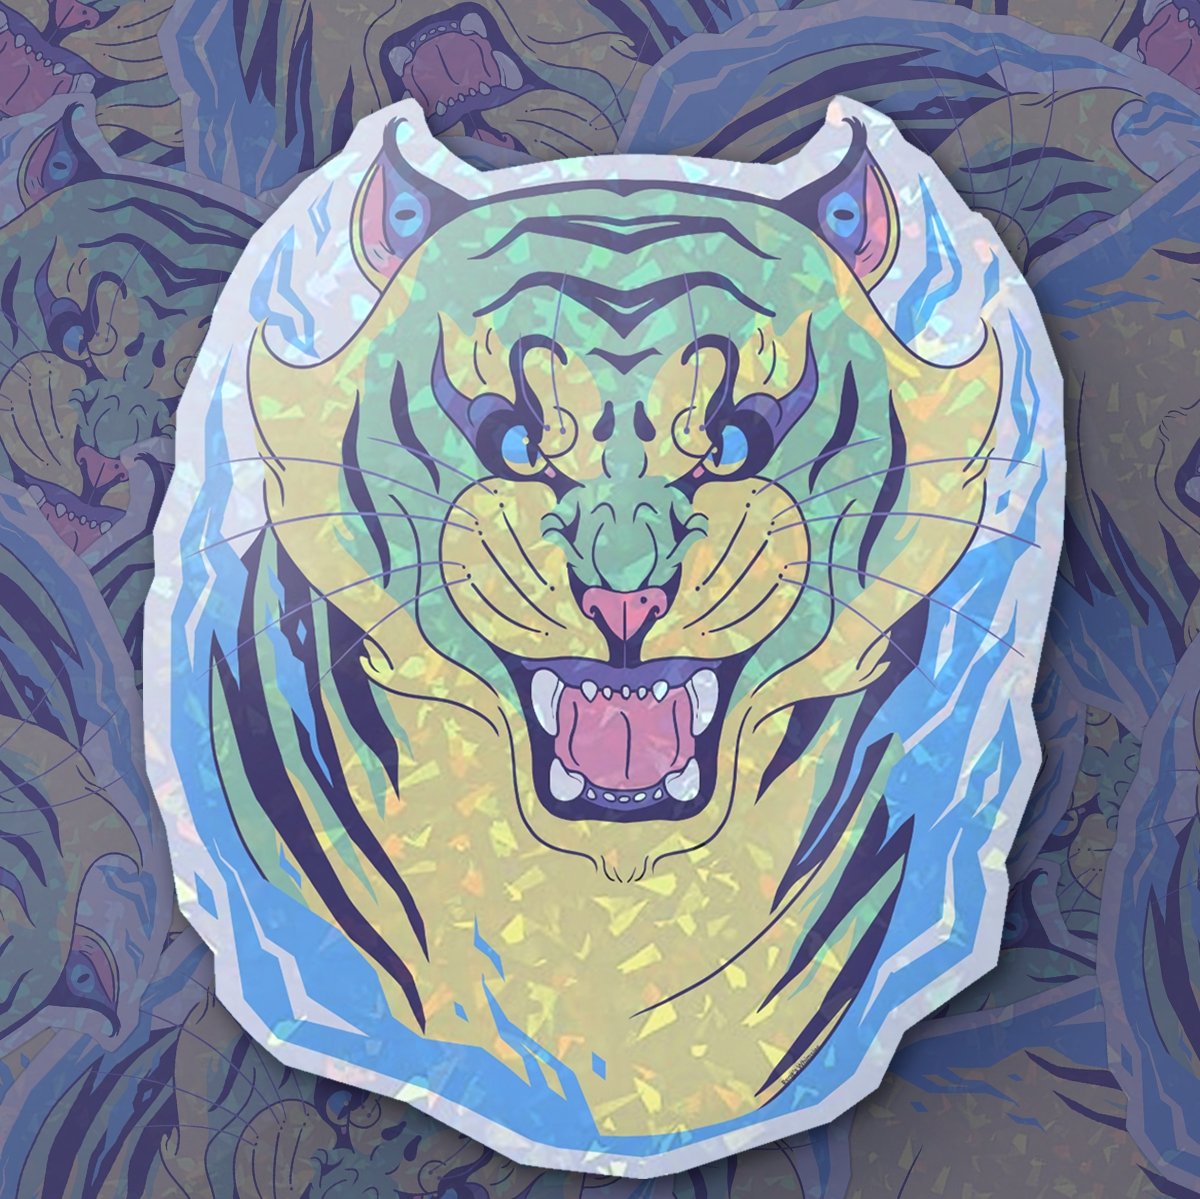 Holographic Mystic Tiger Sticker - Paper productsRene's Whimsies